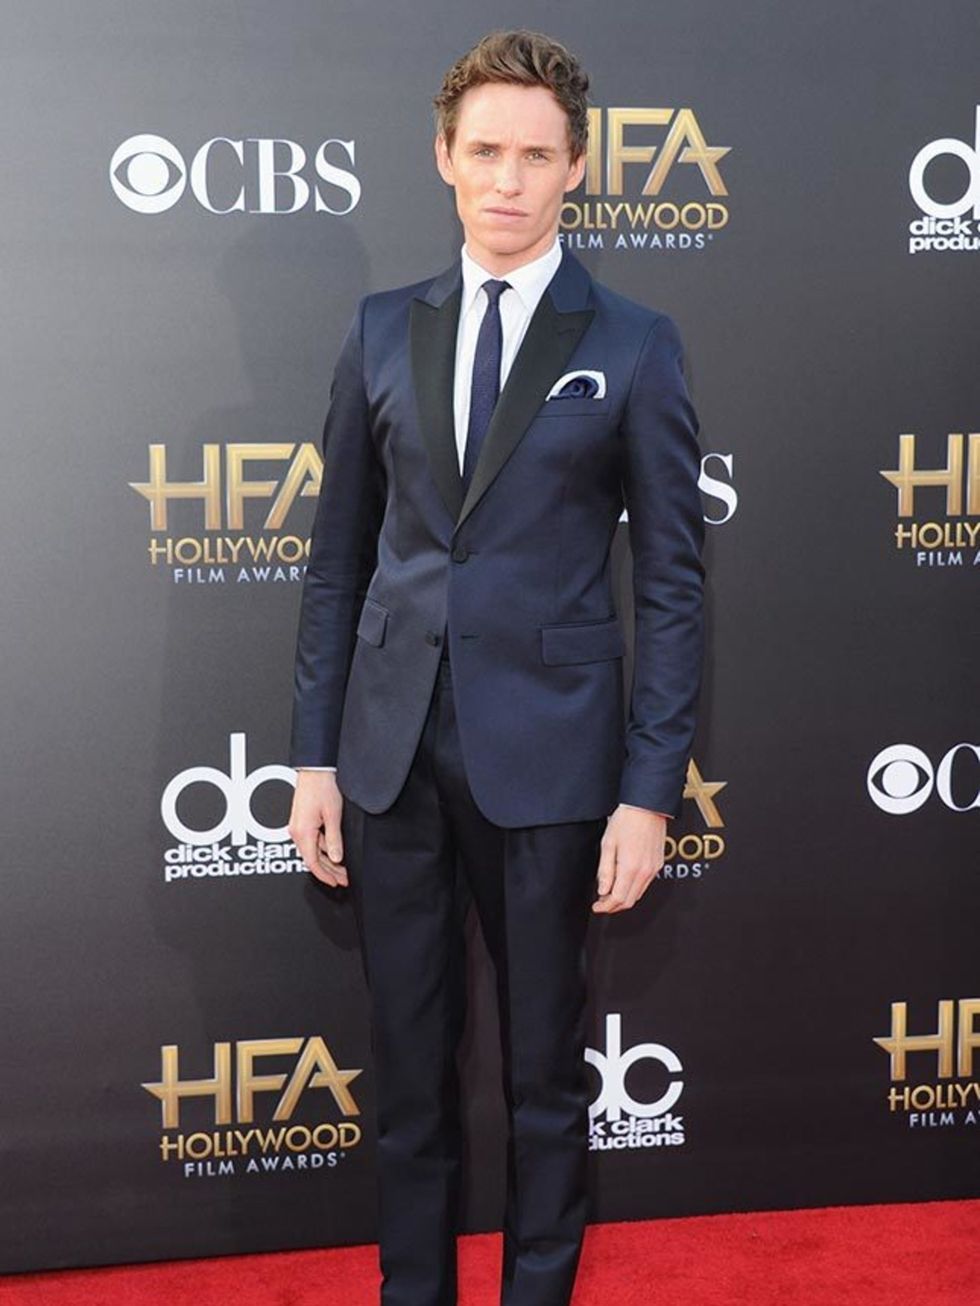 <p>Eddie Redmayne attends the Hollywood Film Awards in LA, November 2014. </p>

<p>Preorder your collector's edition ELLE January issue featuring Eddie Redmayne on the cover <a href="http://www.hearstmagazines.co.uk/elle/eddie">here</a>.</p>